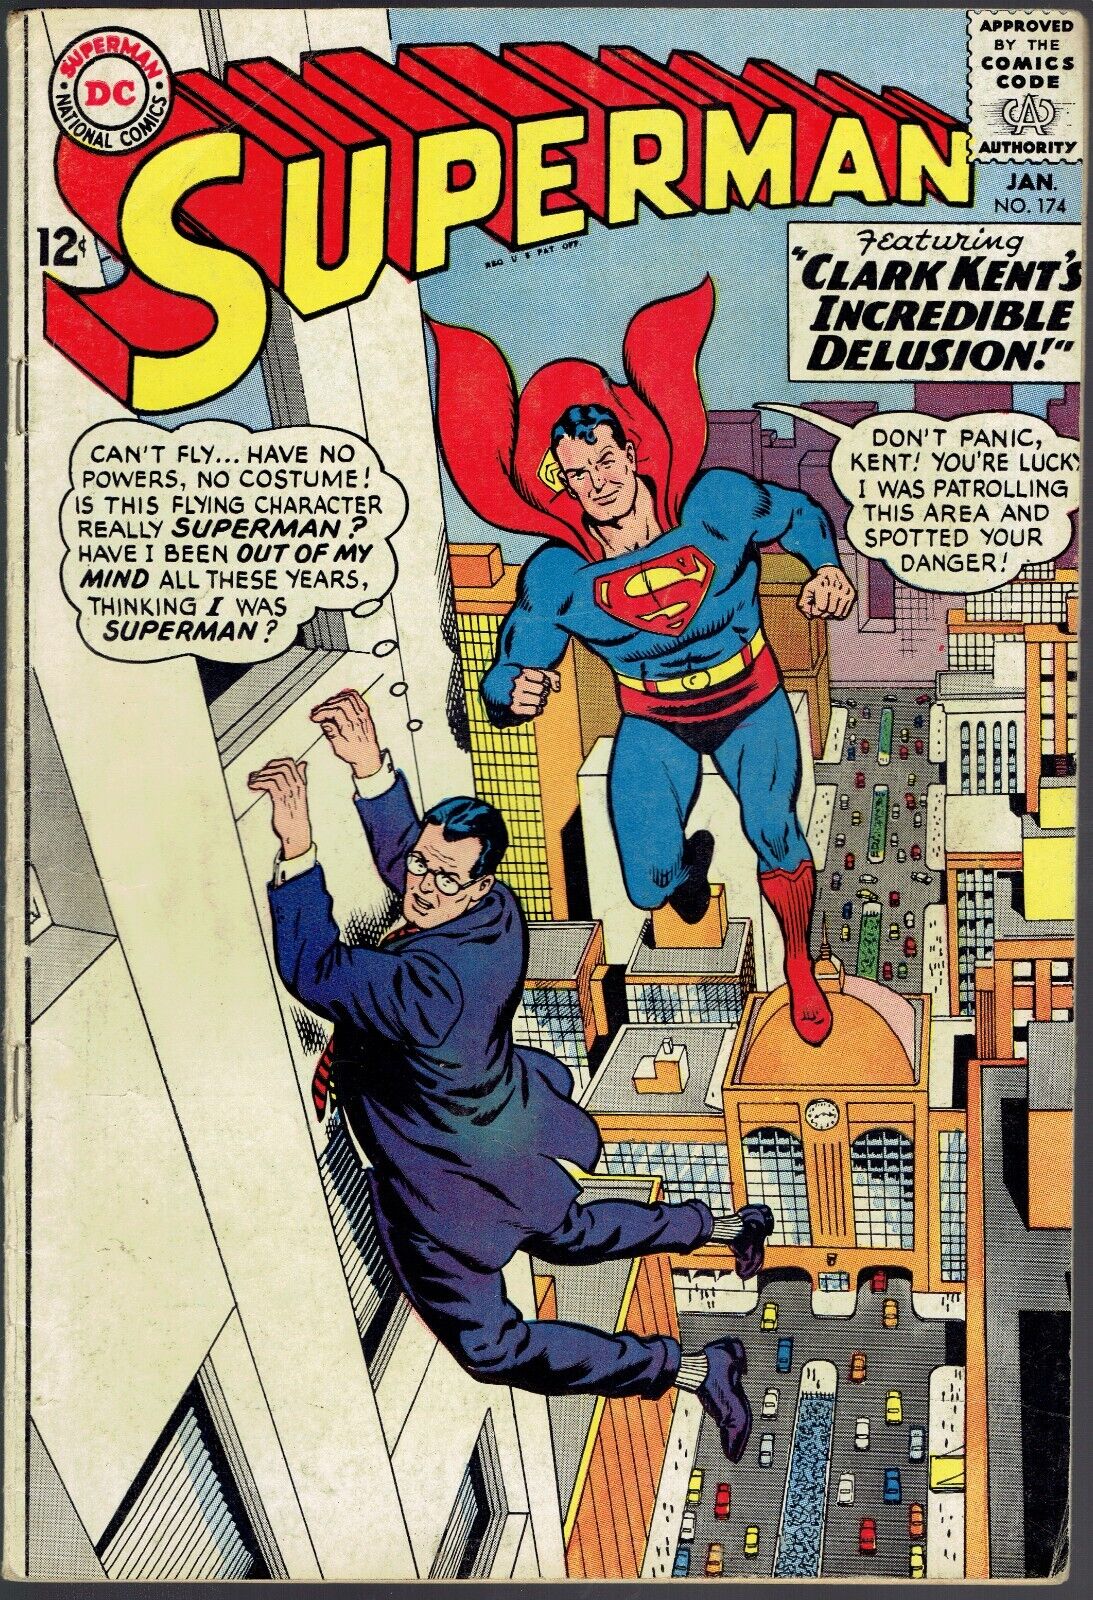 Superman #174 - Clark Kent's Incredible Delusion (DC, 1965) Combined shipping